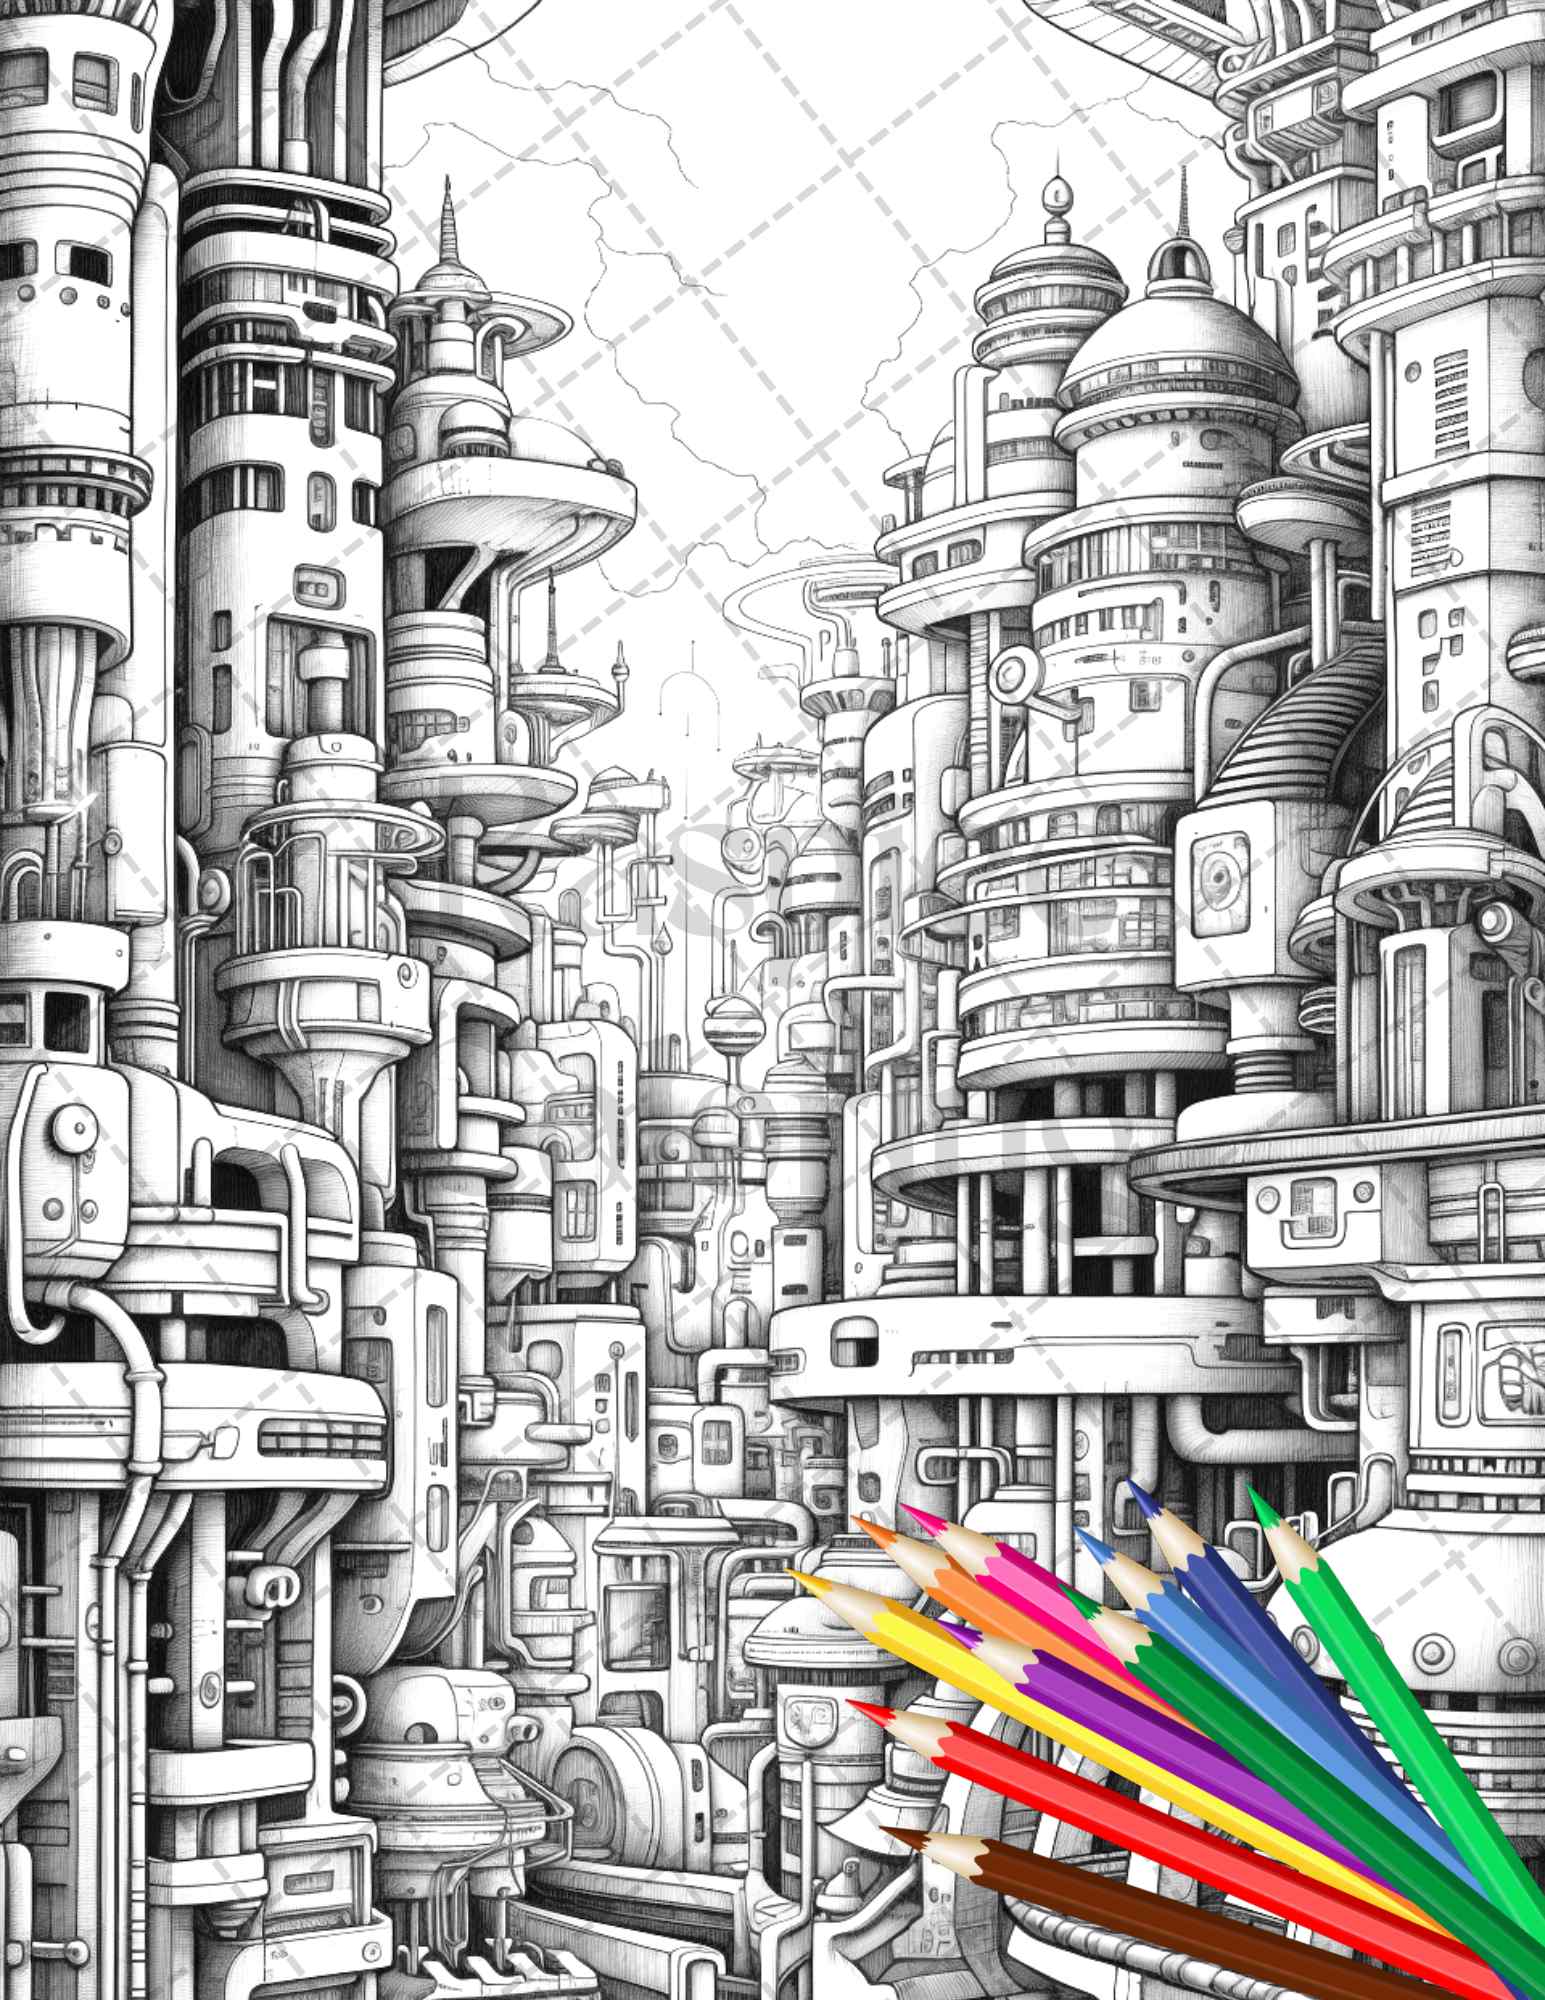 futuristic coloring pages, grayscale coloring book, printable adult coloring pages, cityscape coloring sheets, urban coloring art, metropolis coloring illustrations, detailed grayscale designs, adult coloring book pages, Futuristic city coloring, printable grayscale artwork, coloring pages for adults, high-quality coloring prints, urban landscape coloring, futuristic art therapy, stress-relieving coloring sheets